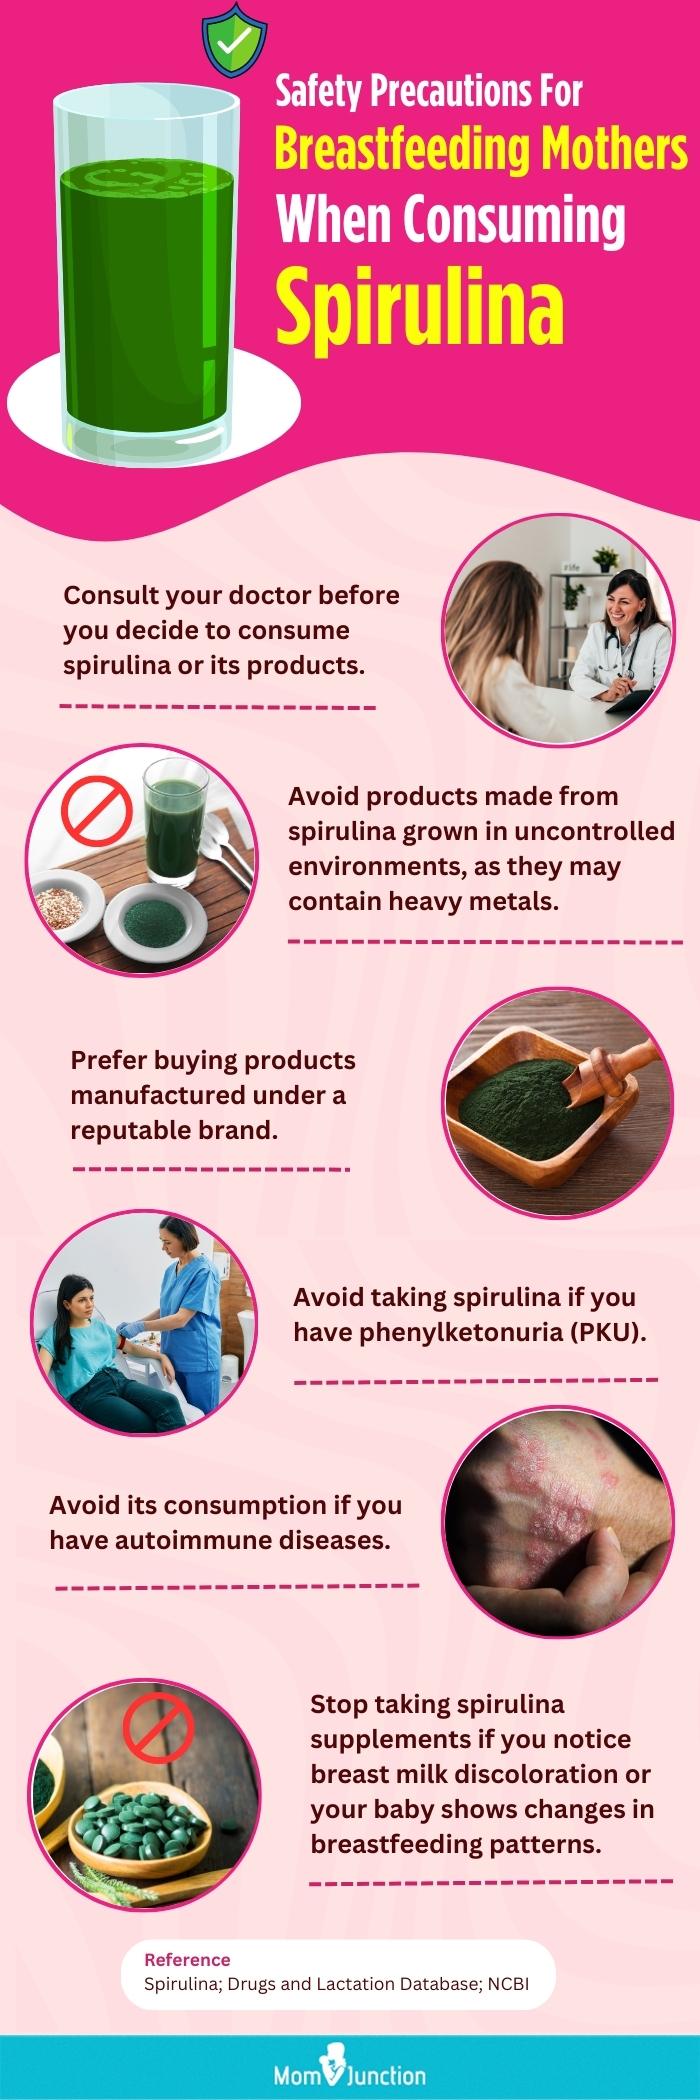 safety precautions for breastfeeding mothers when consuming spirulina (infographic)